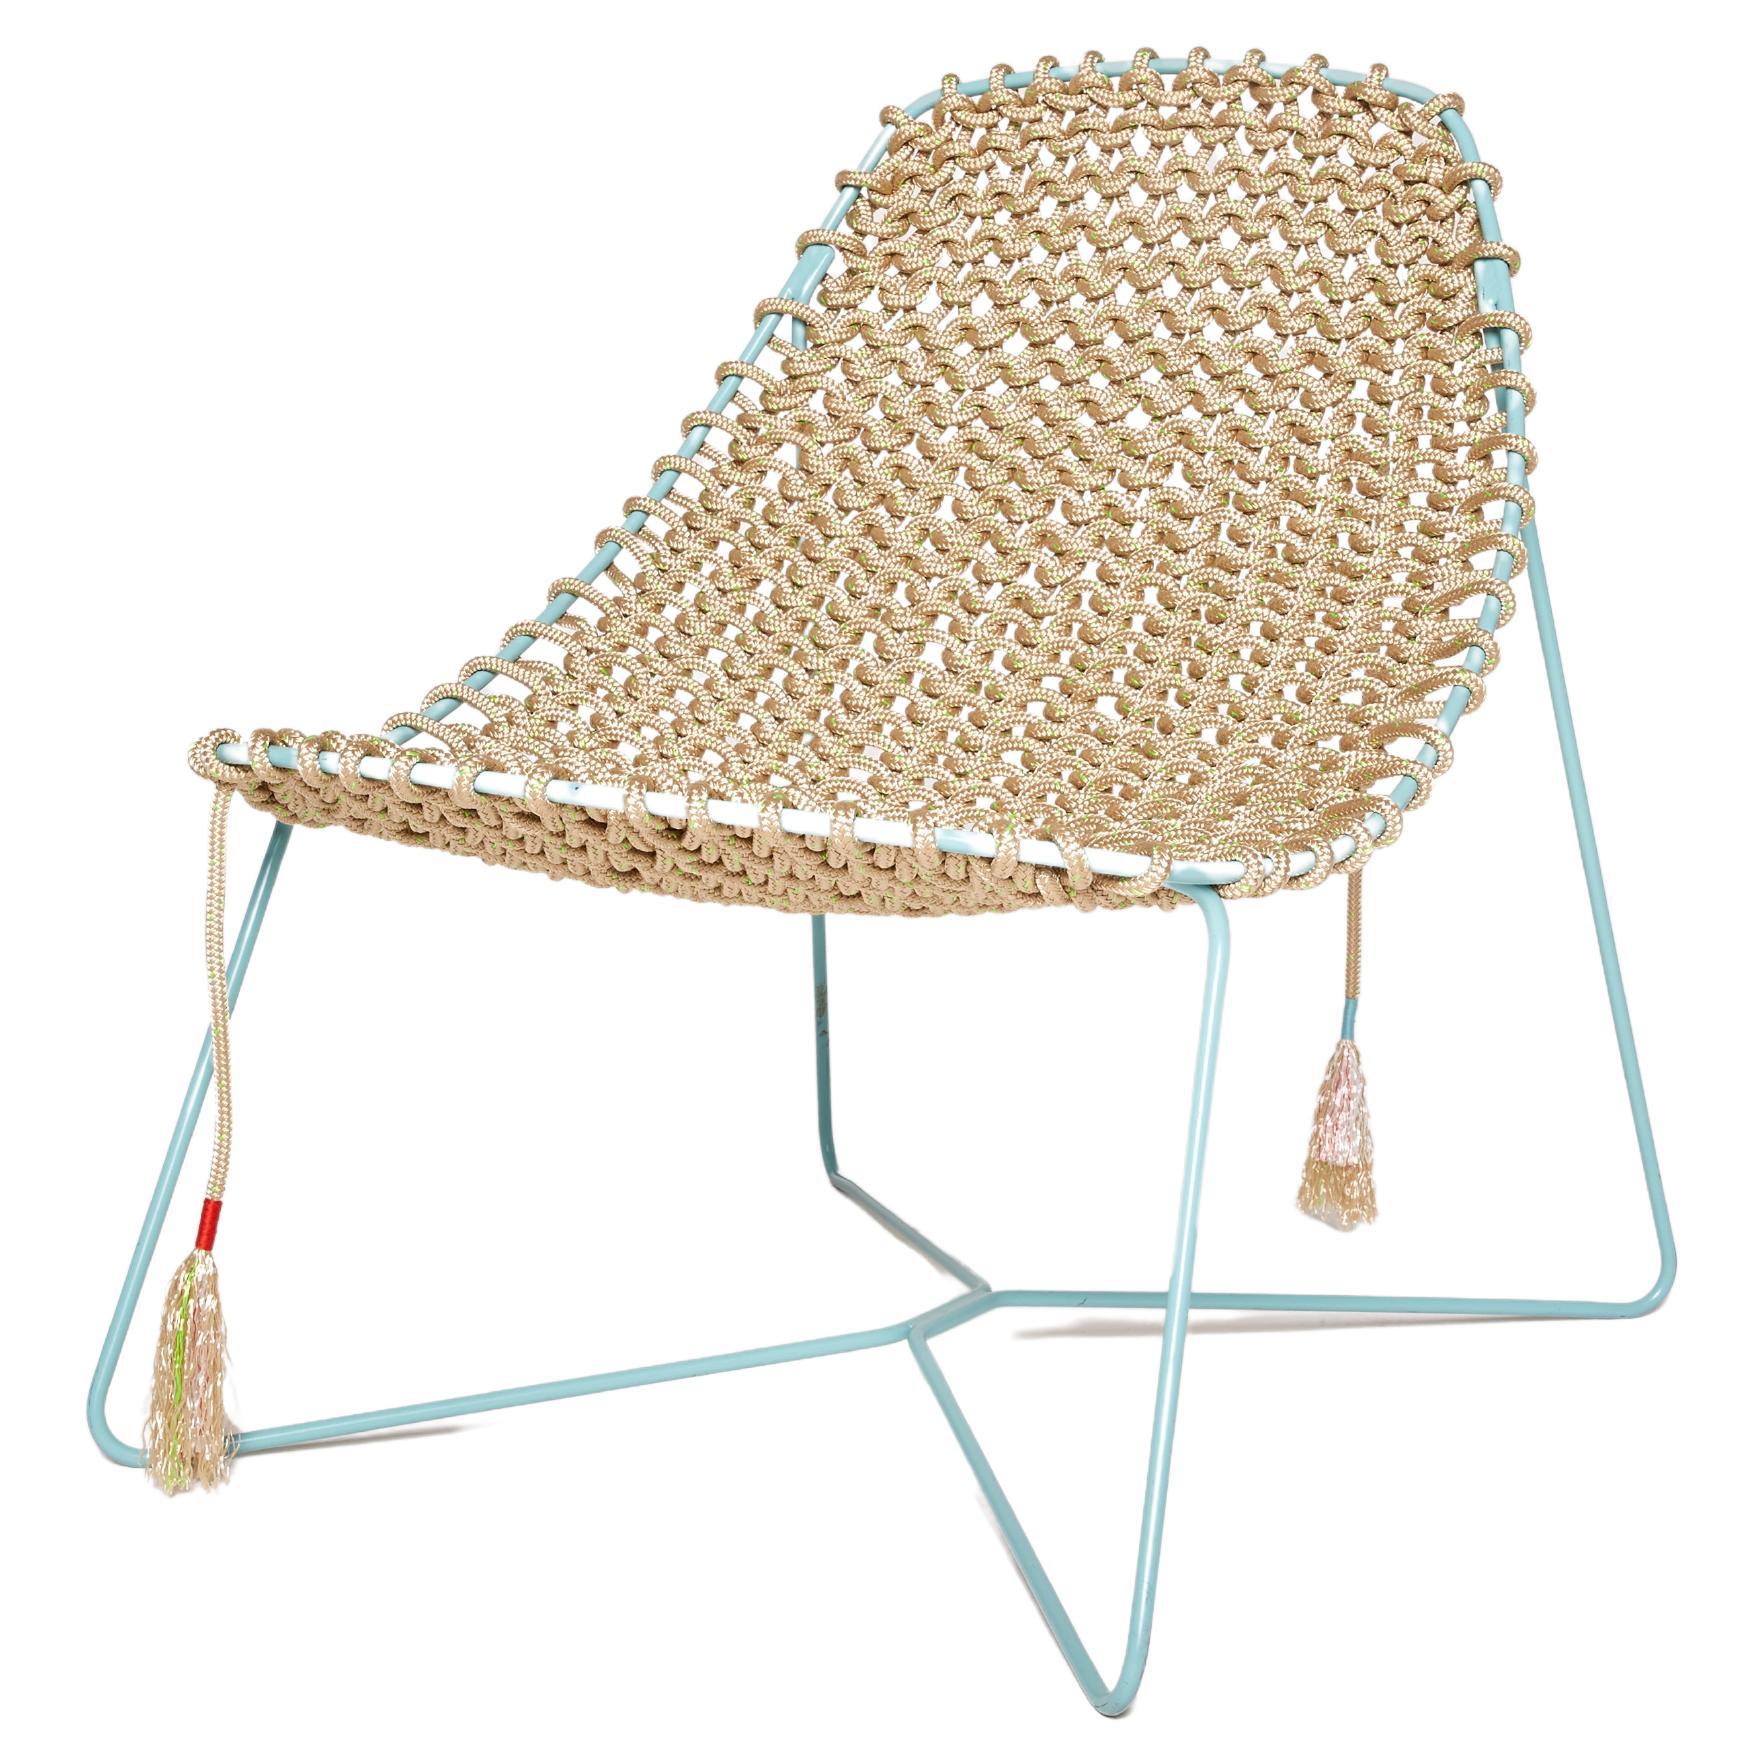 Award nominated beige hand knitted lounger with blue frame by hettler.tüllmann For Sale